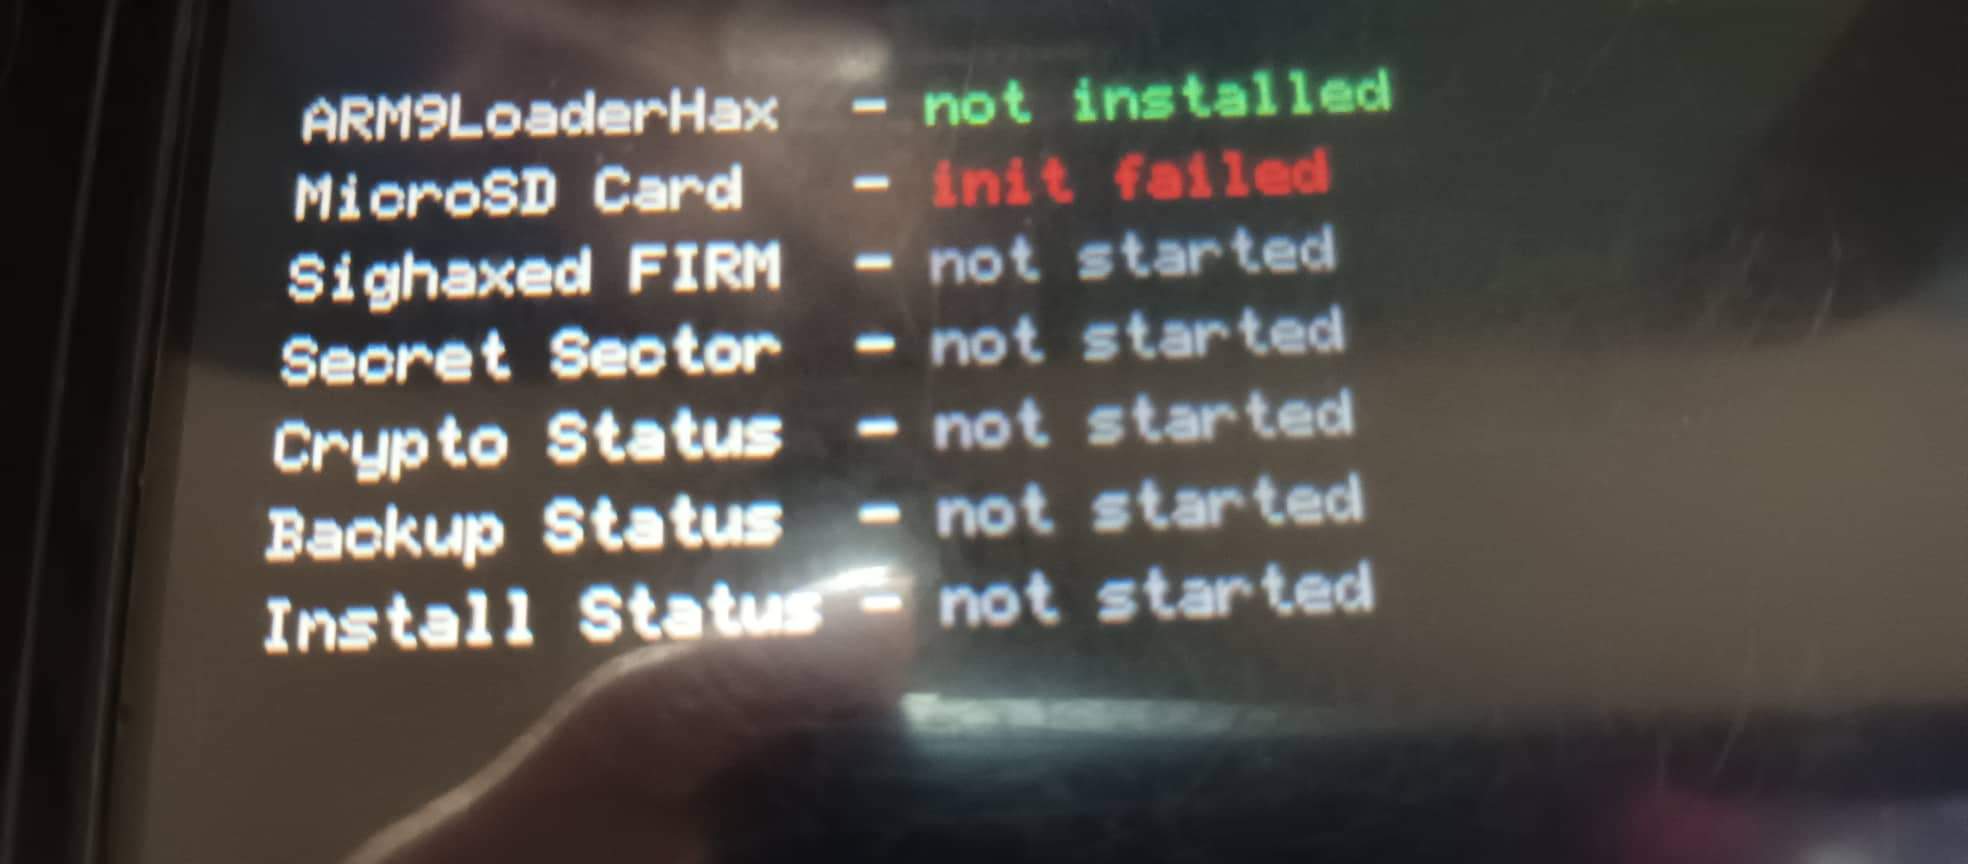 CFW New 3DS XL, error 8046, safeb9installer - MicroSD card: init failed.  Please help | GBAtemp.net - The Independent Video Game Community